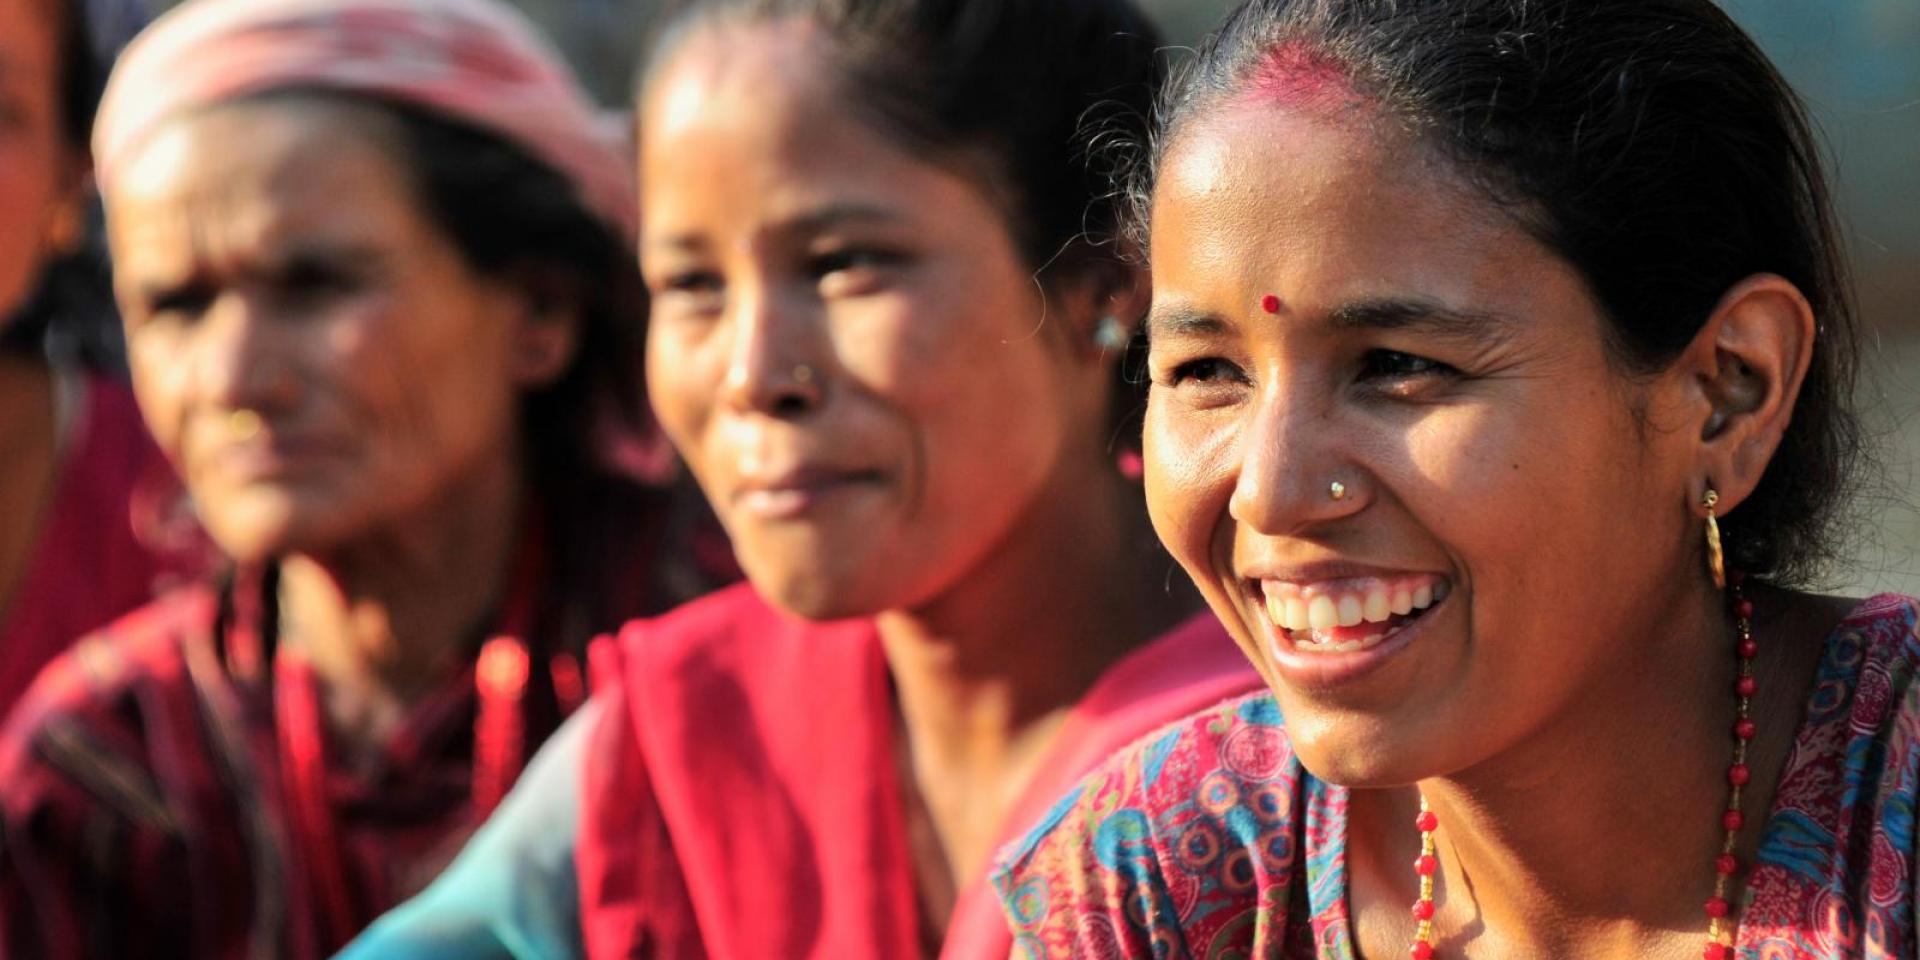 Women smiling in traditional Nepalese dress